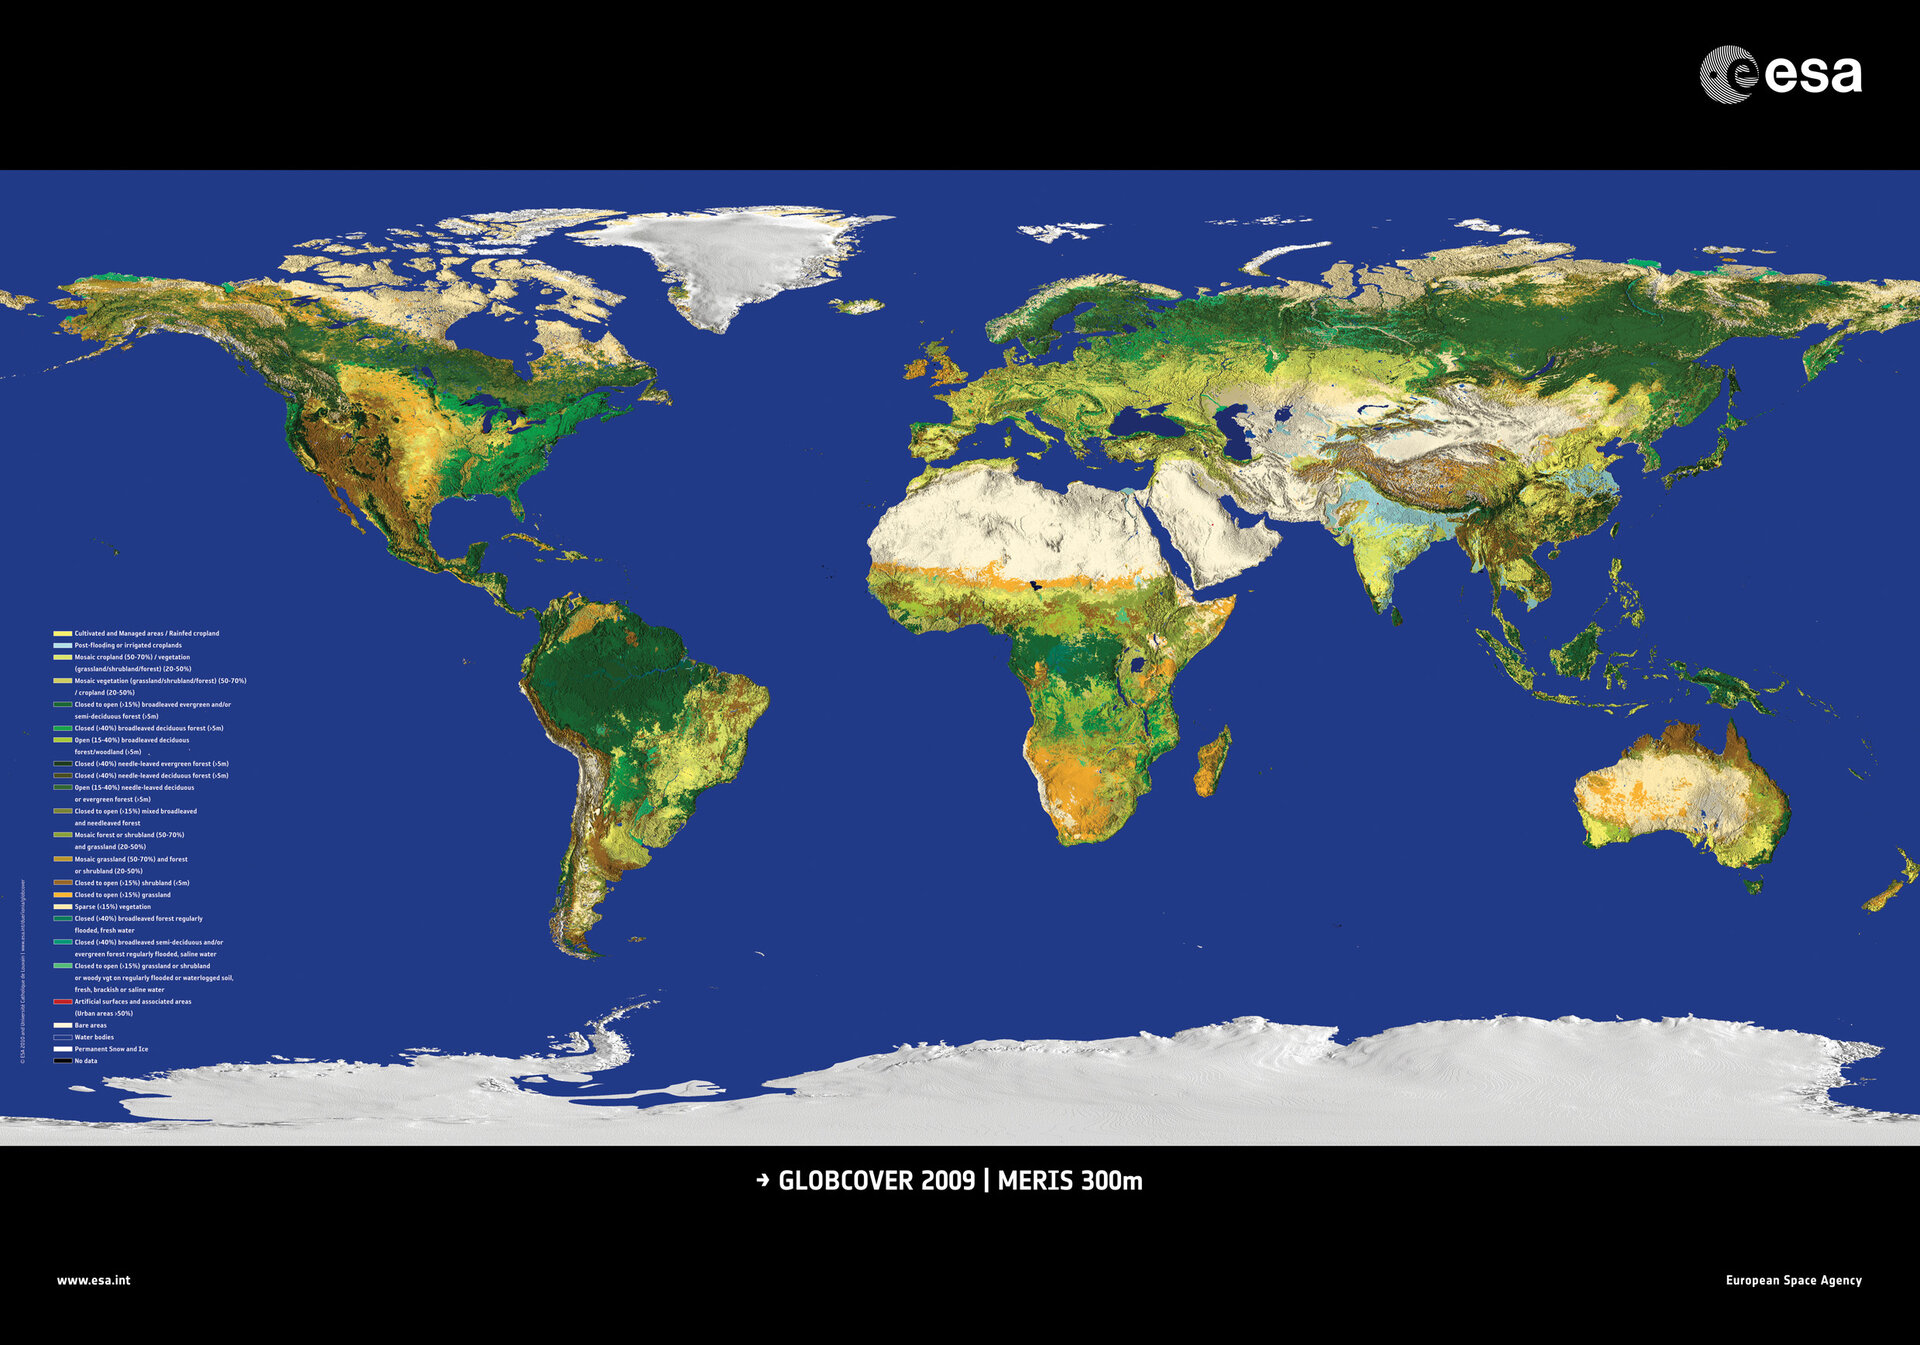 ESA’s 2009 global land cover map